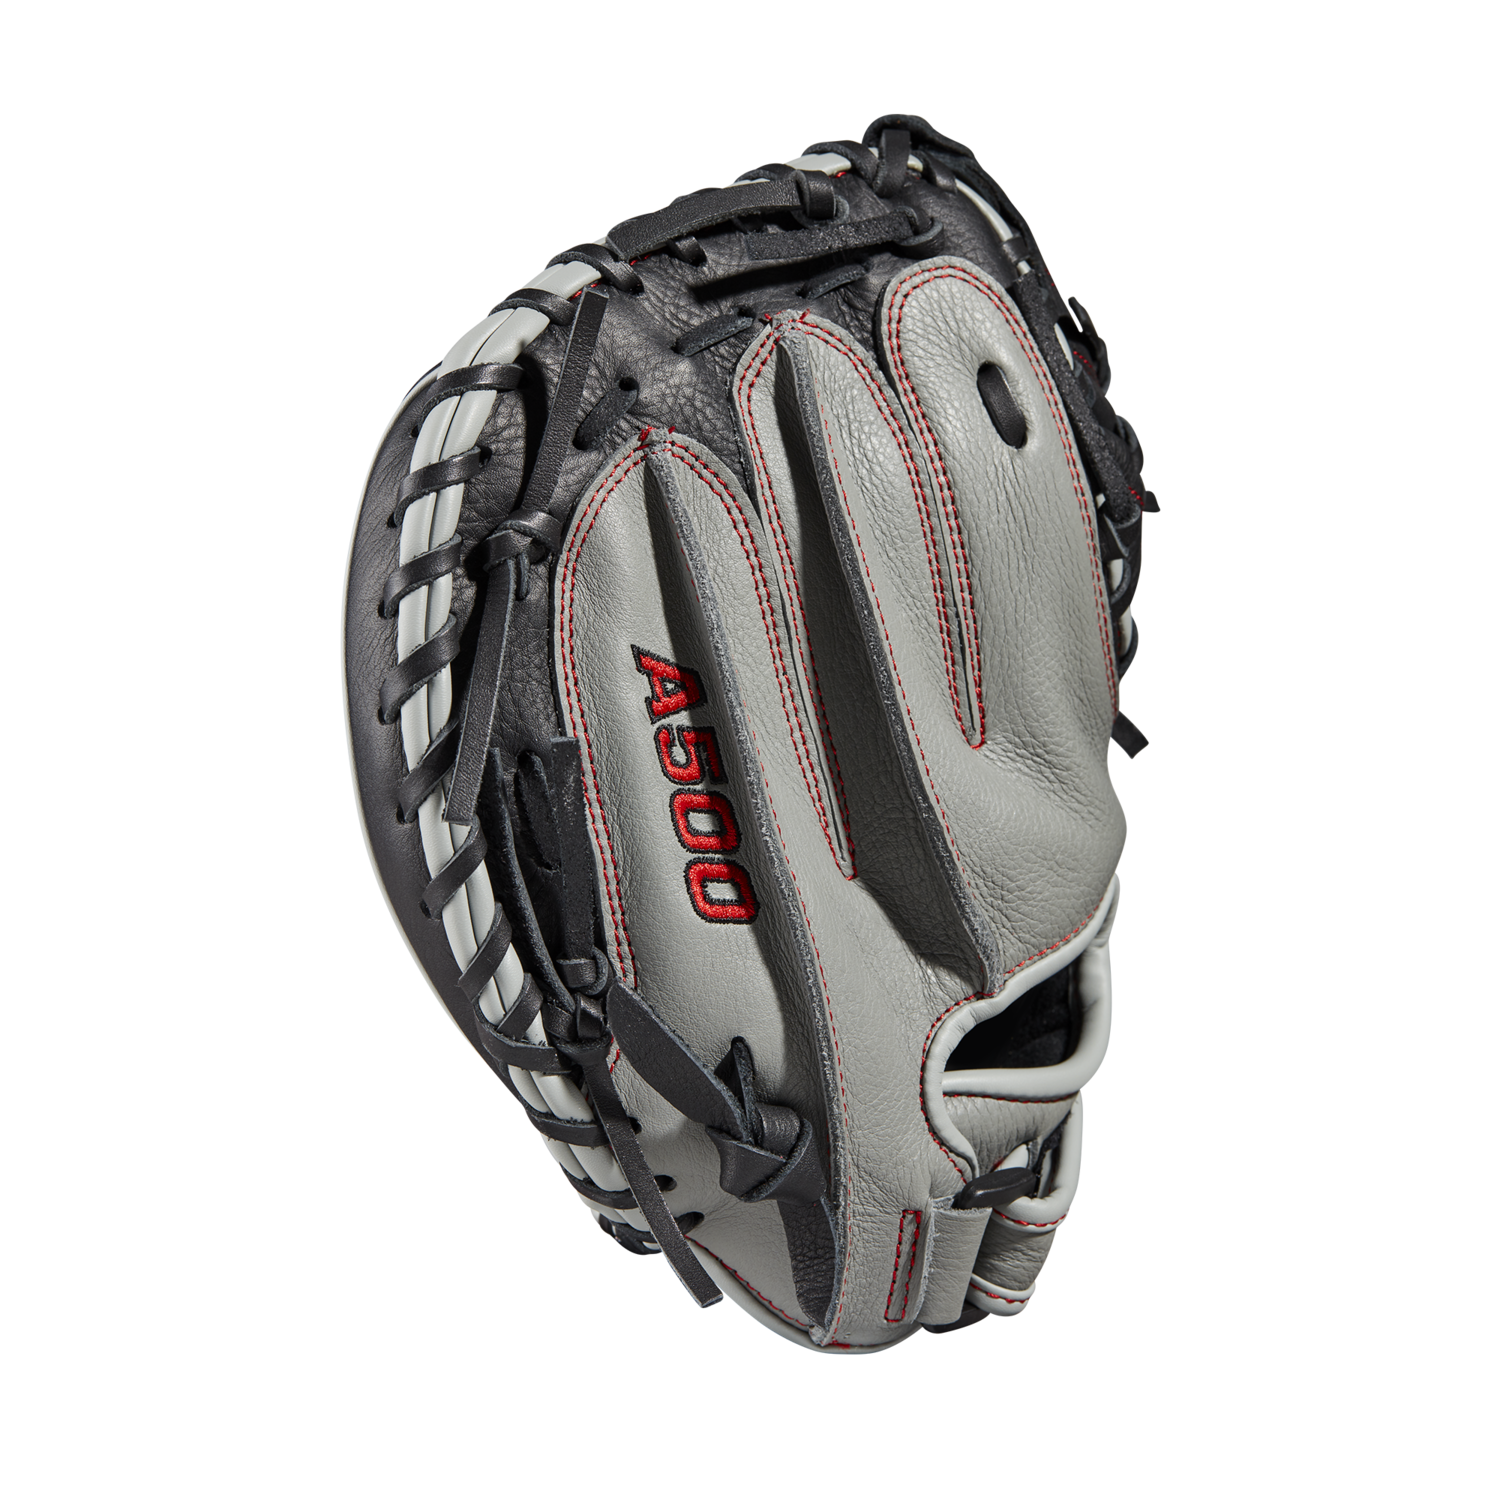 Guide to Best Catchers Mitts and Protective Gear